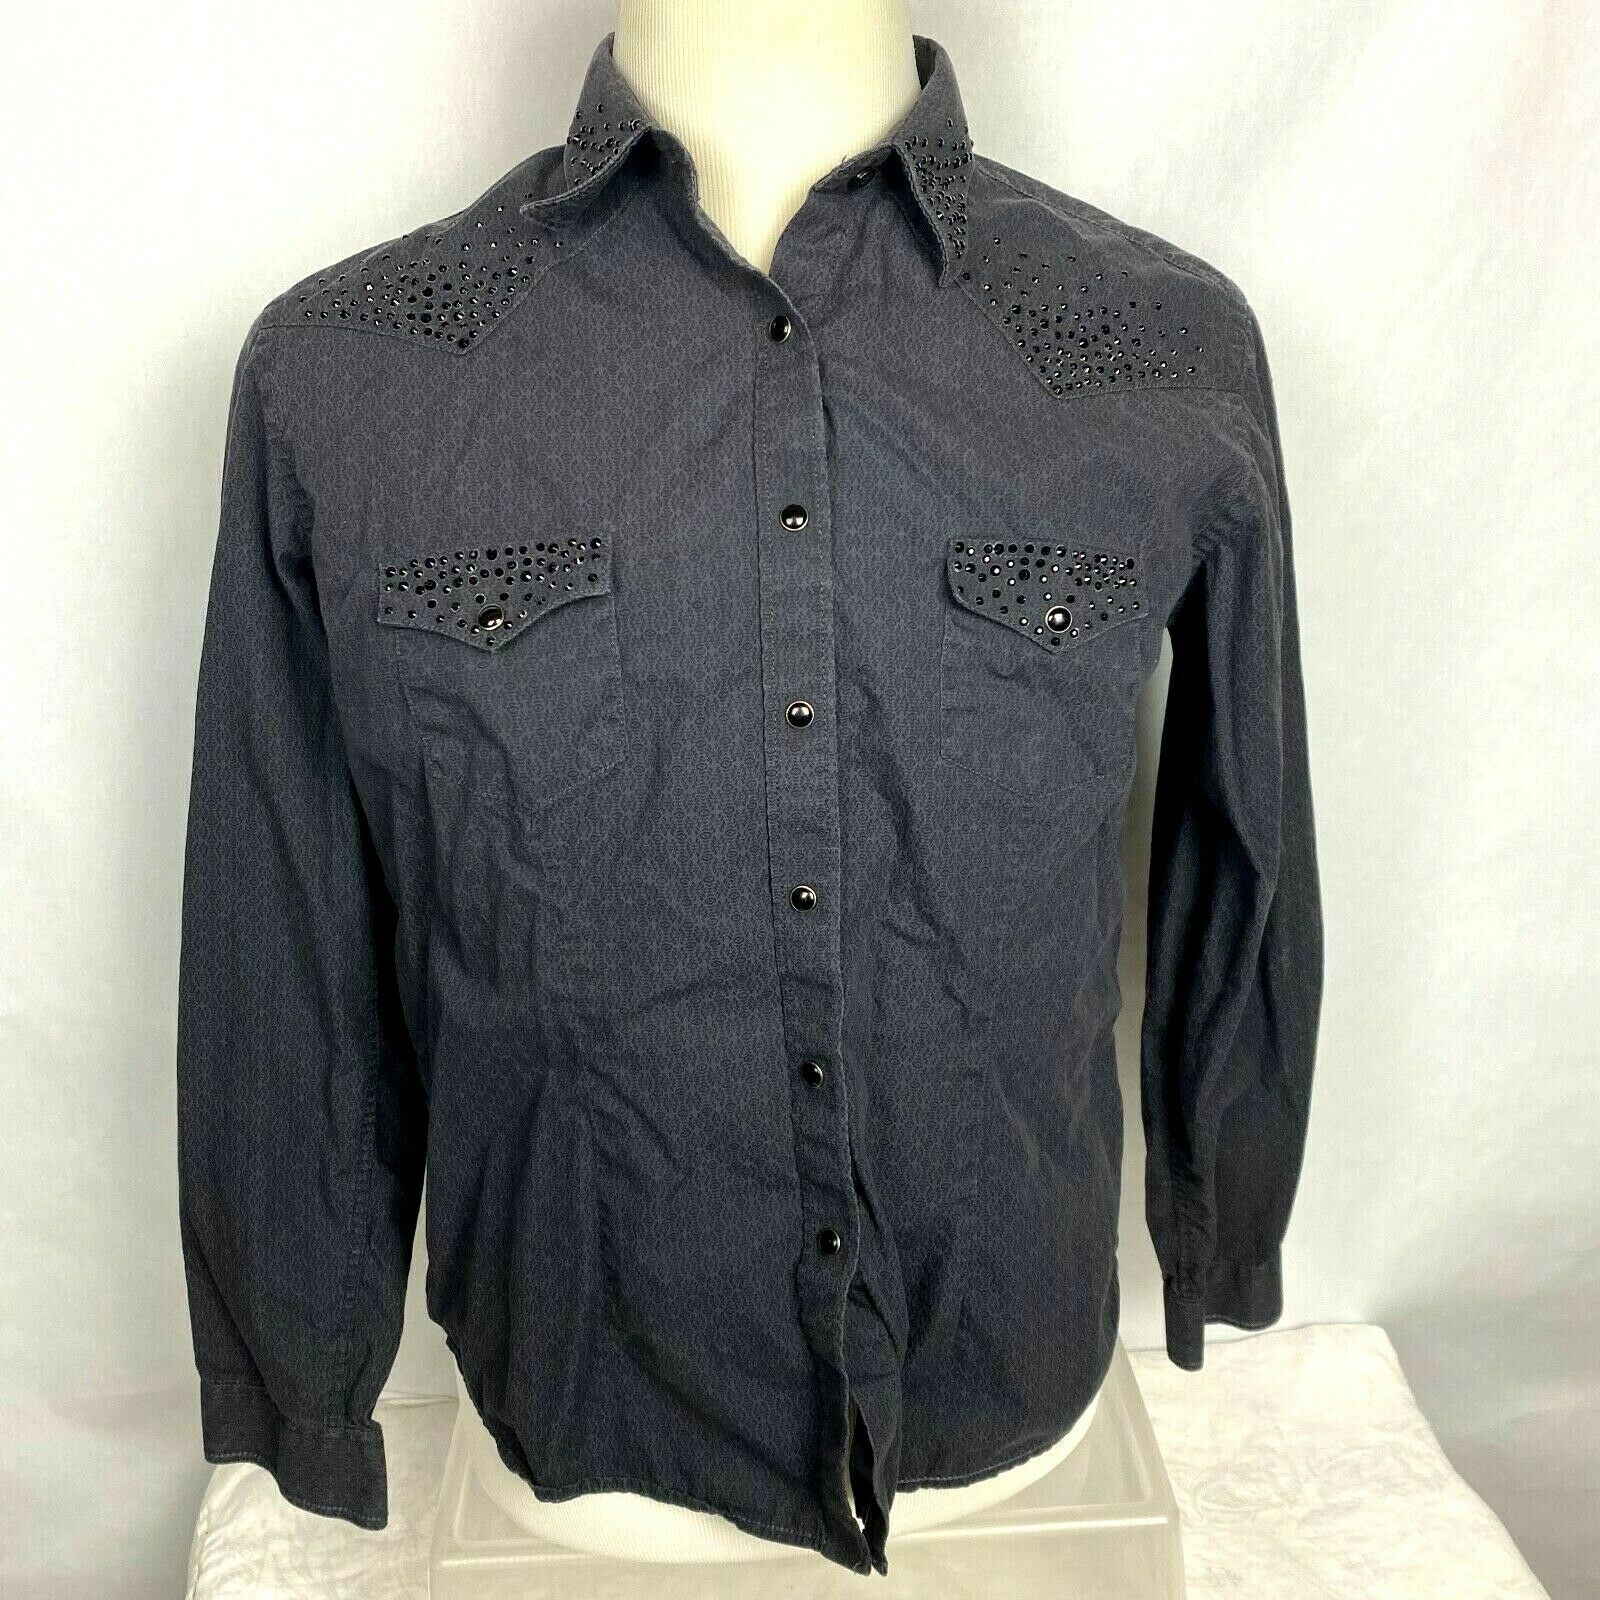 Primary image for Panhandle Rough Stock Rhinestones Gray Western Shirt Enamel Snap Buttons Sz L